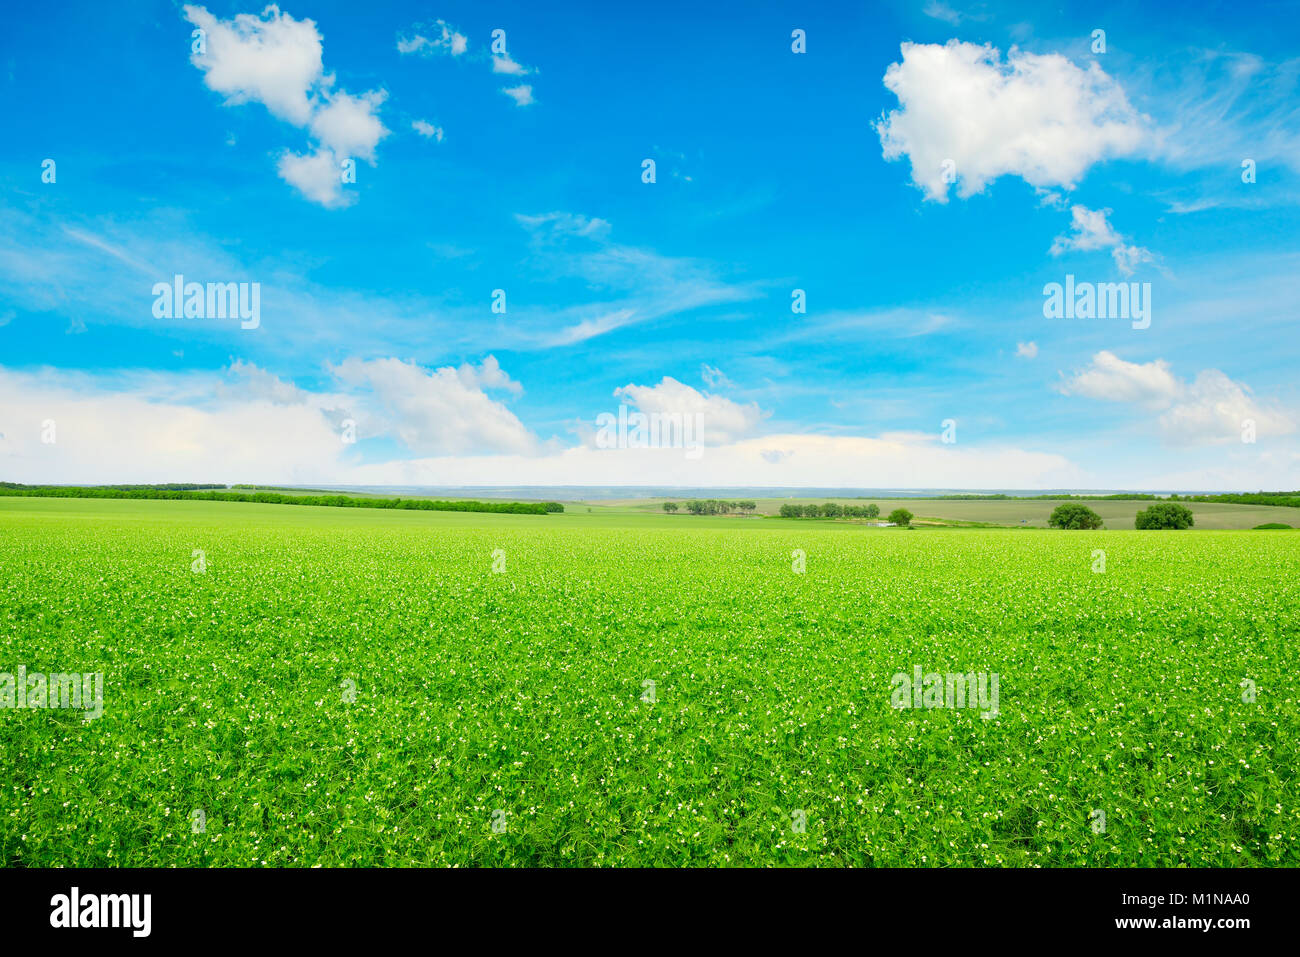 Peas field and blue sky. Summer landscape. Stock Photo